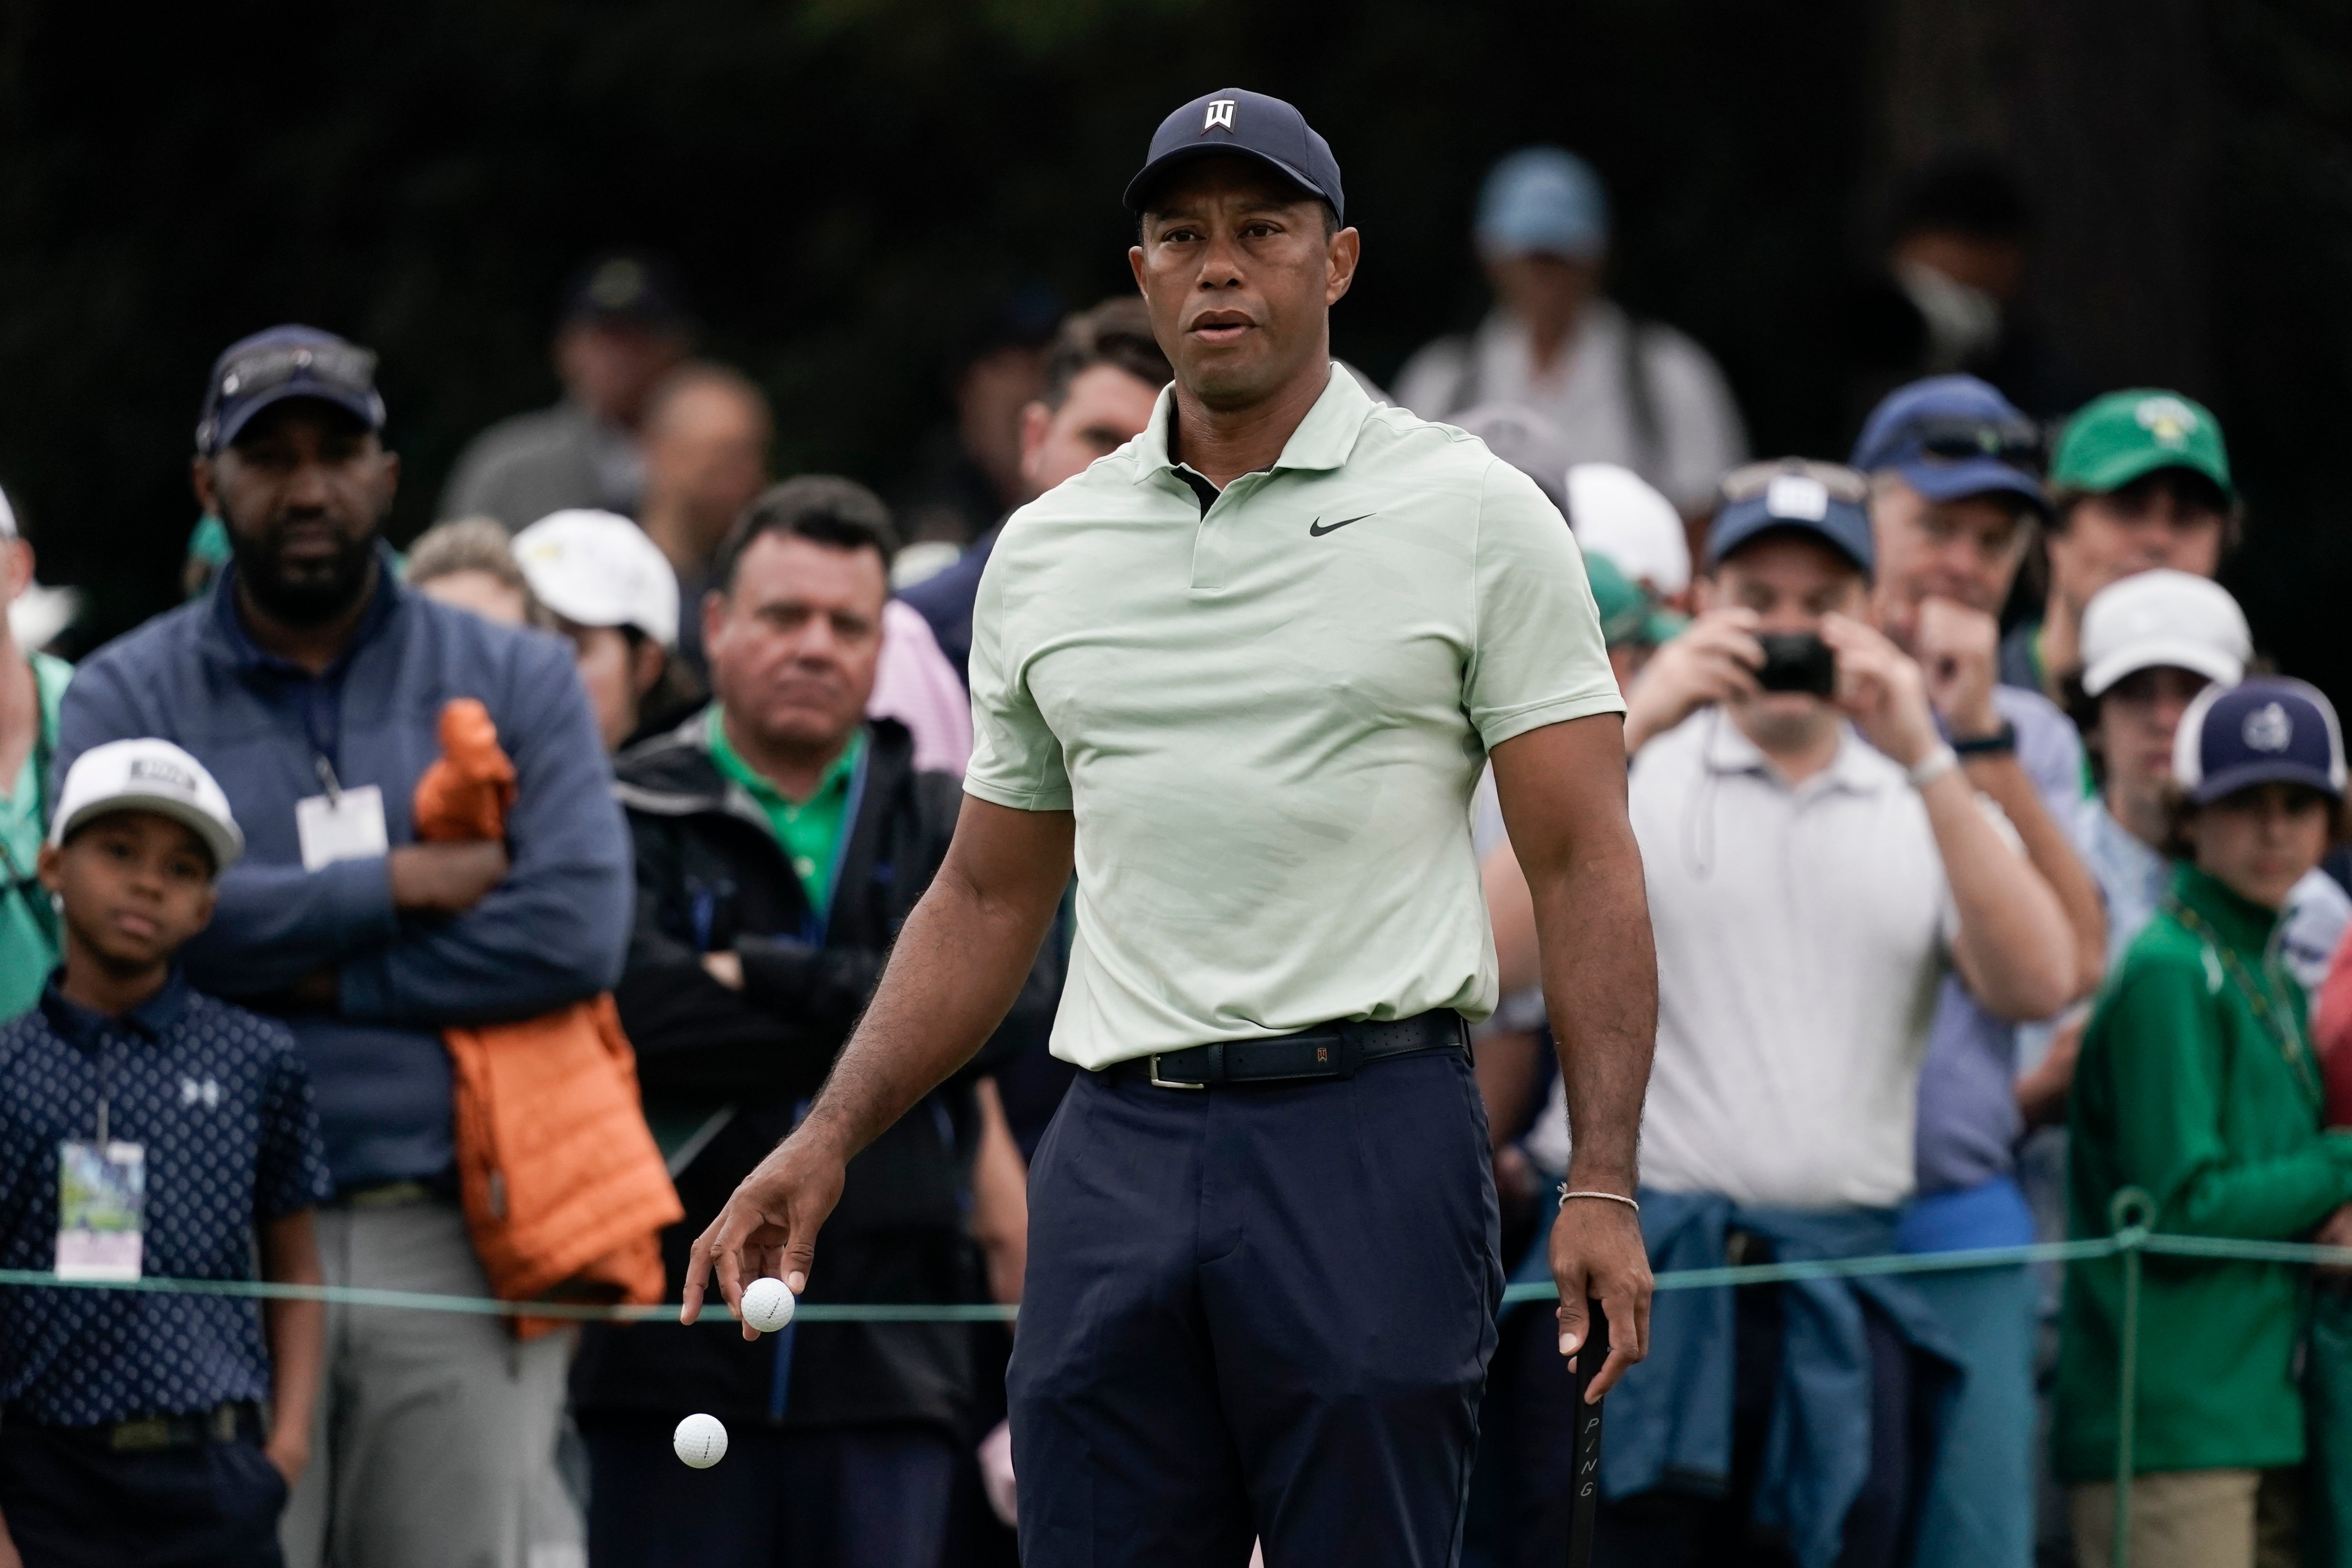 Tiger Woods is set to make his comeback at Augusta